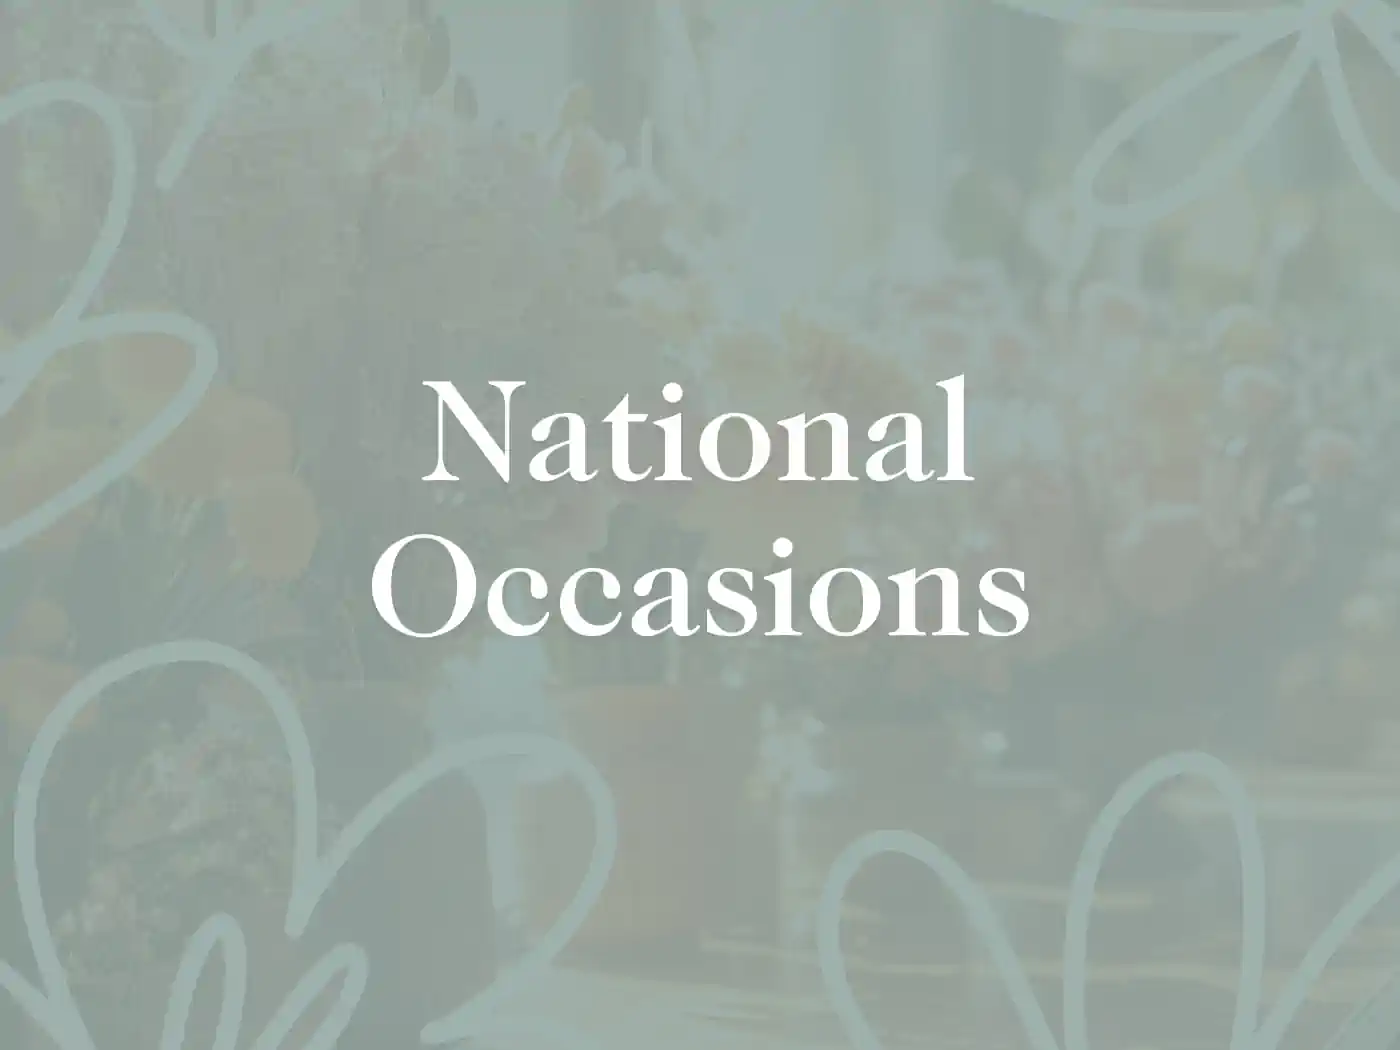 National Occasions - Fabulous Flowers and Gifts, National Occasions